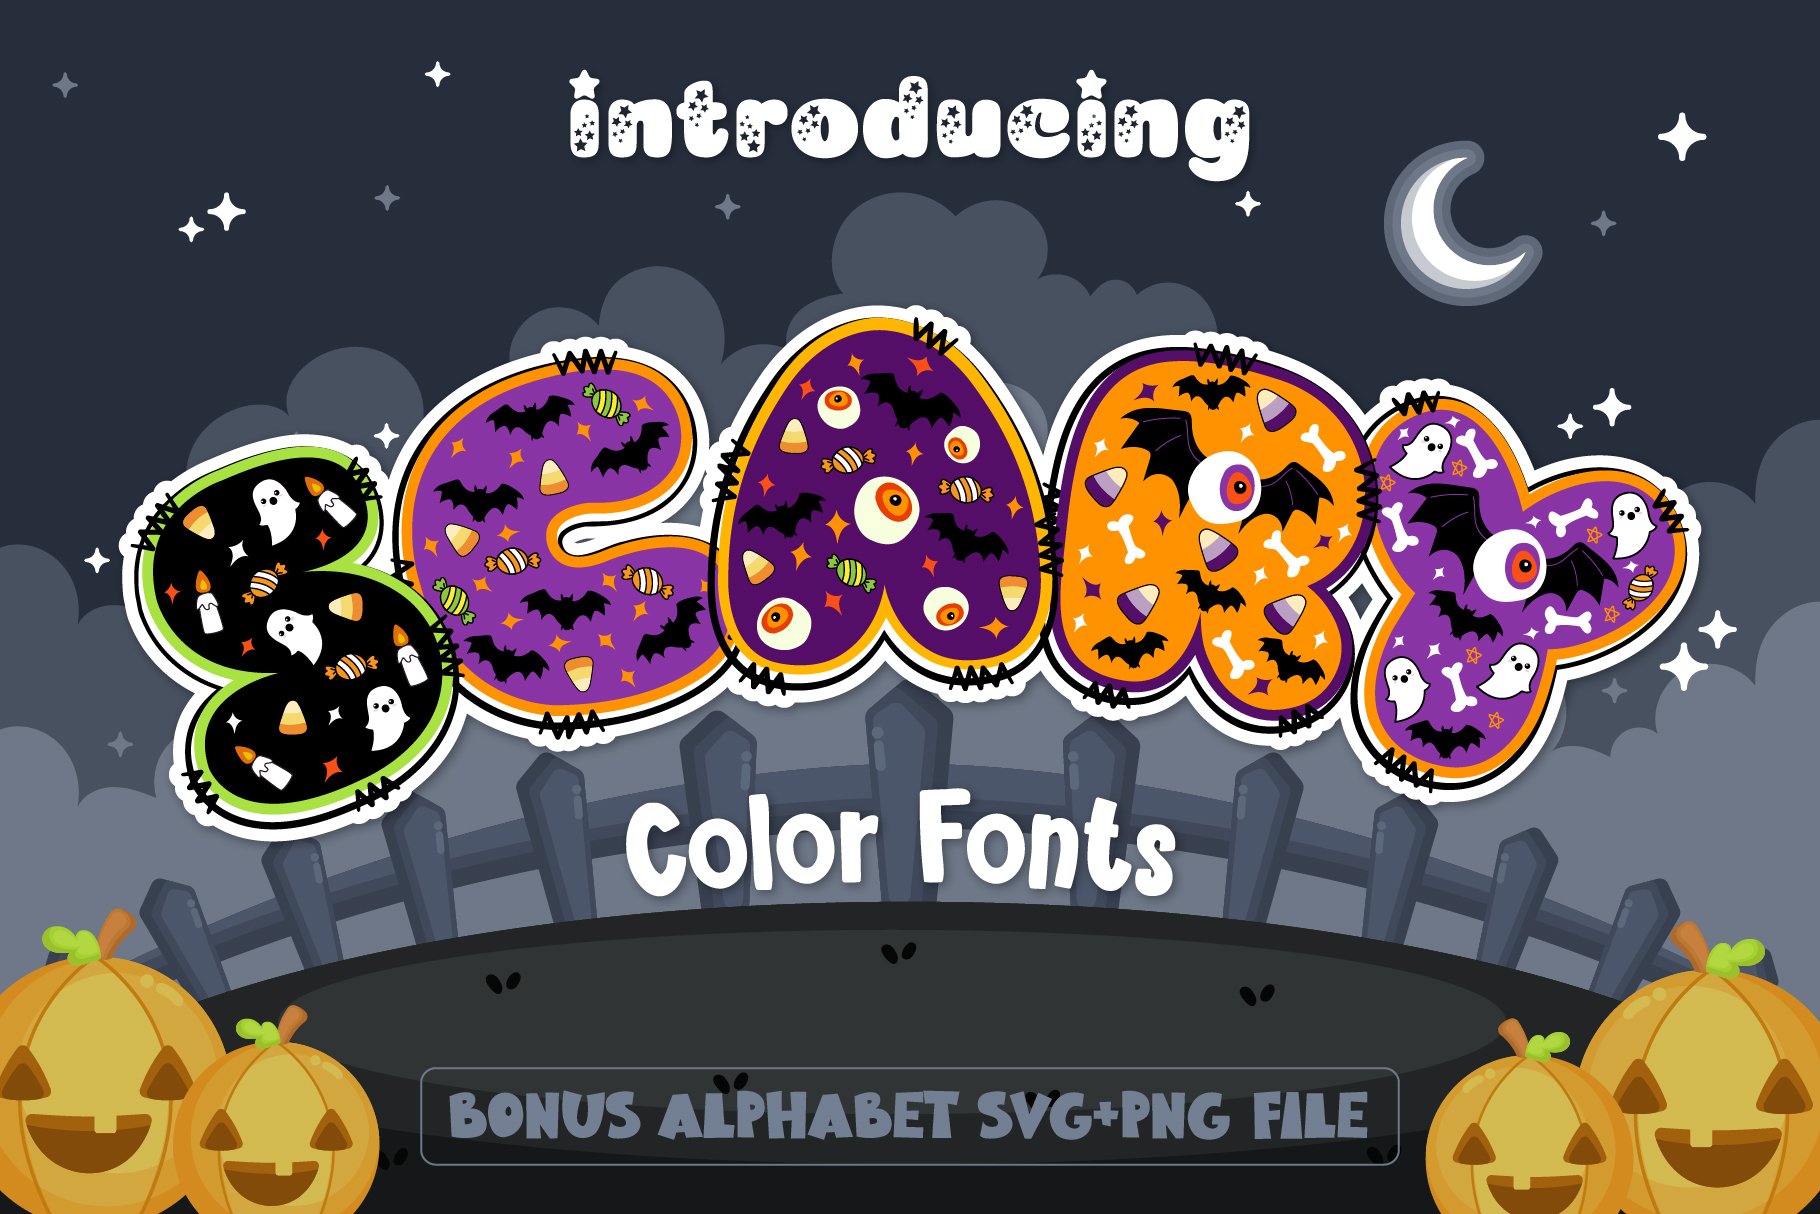 Scary Color Fonts cover image.